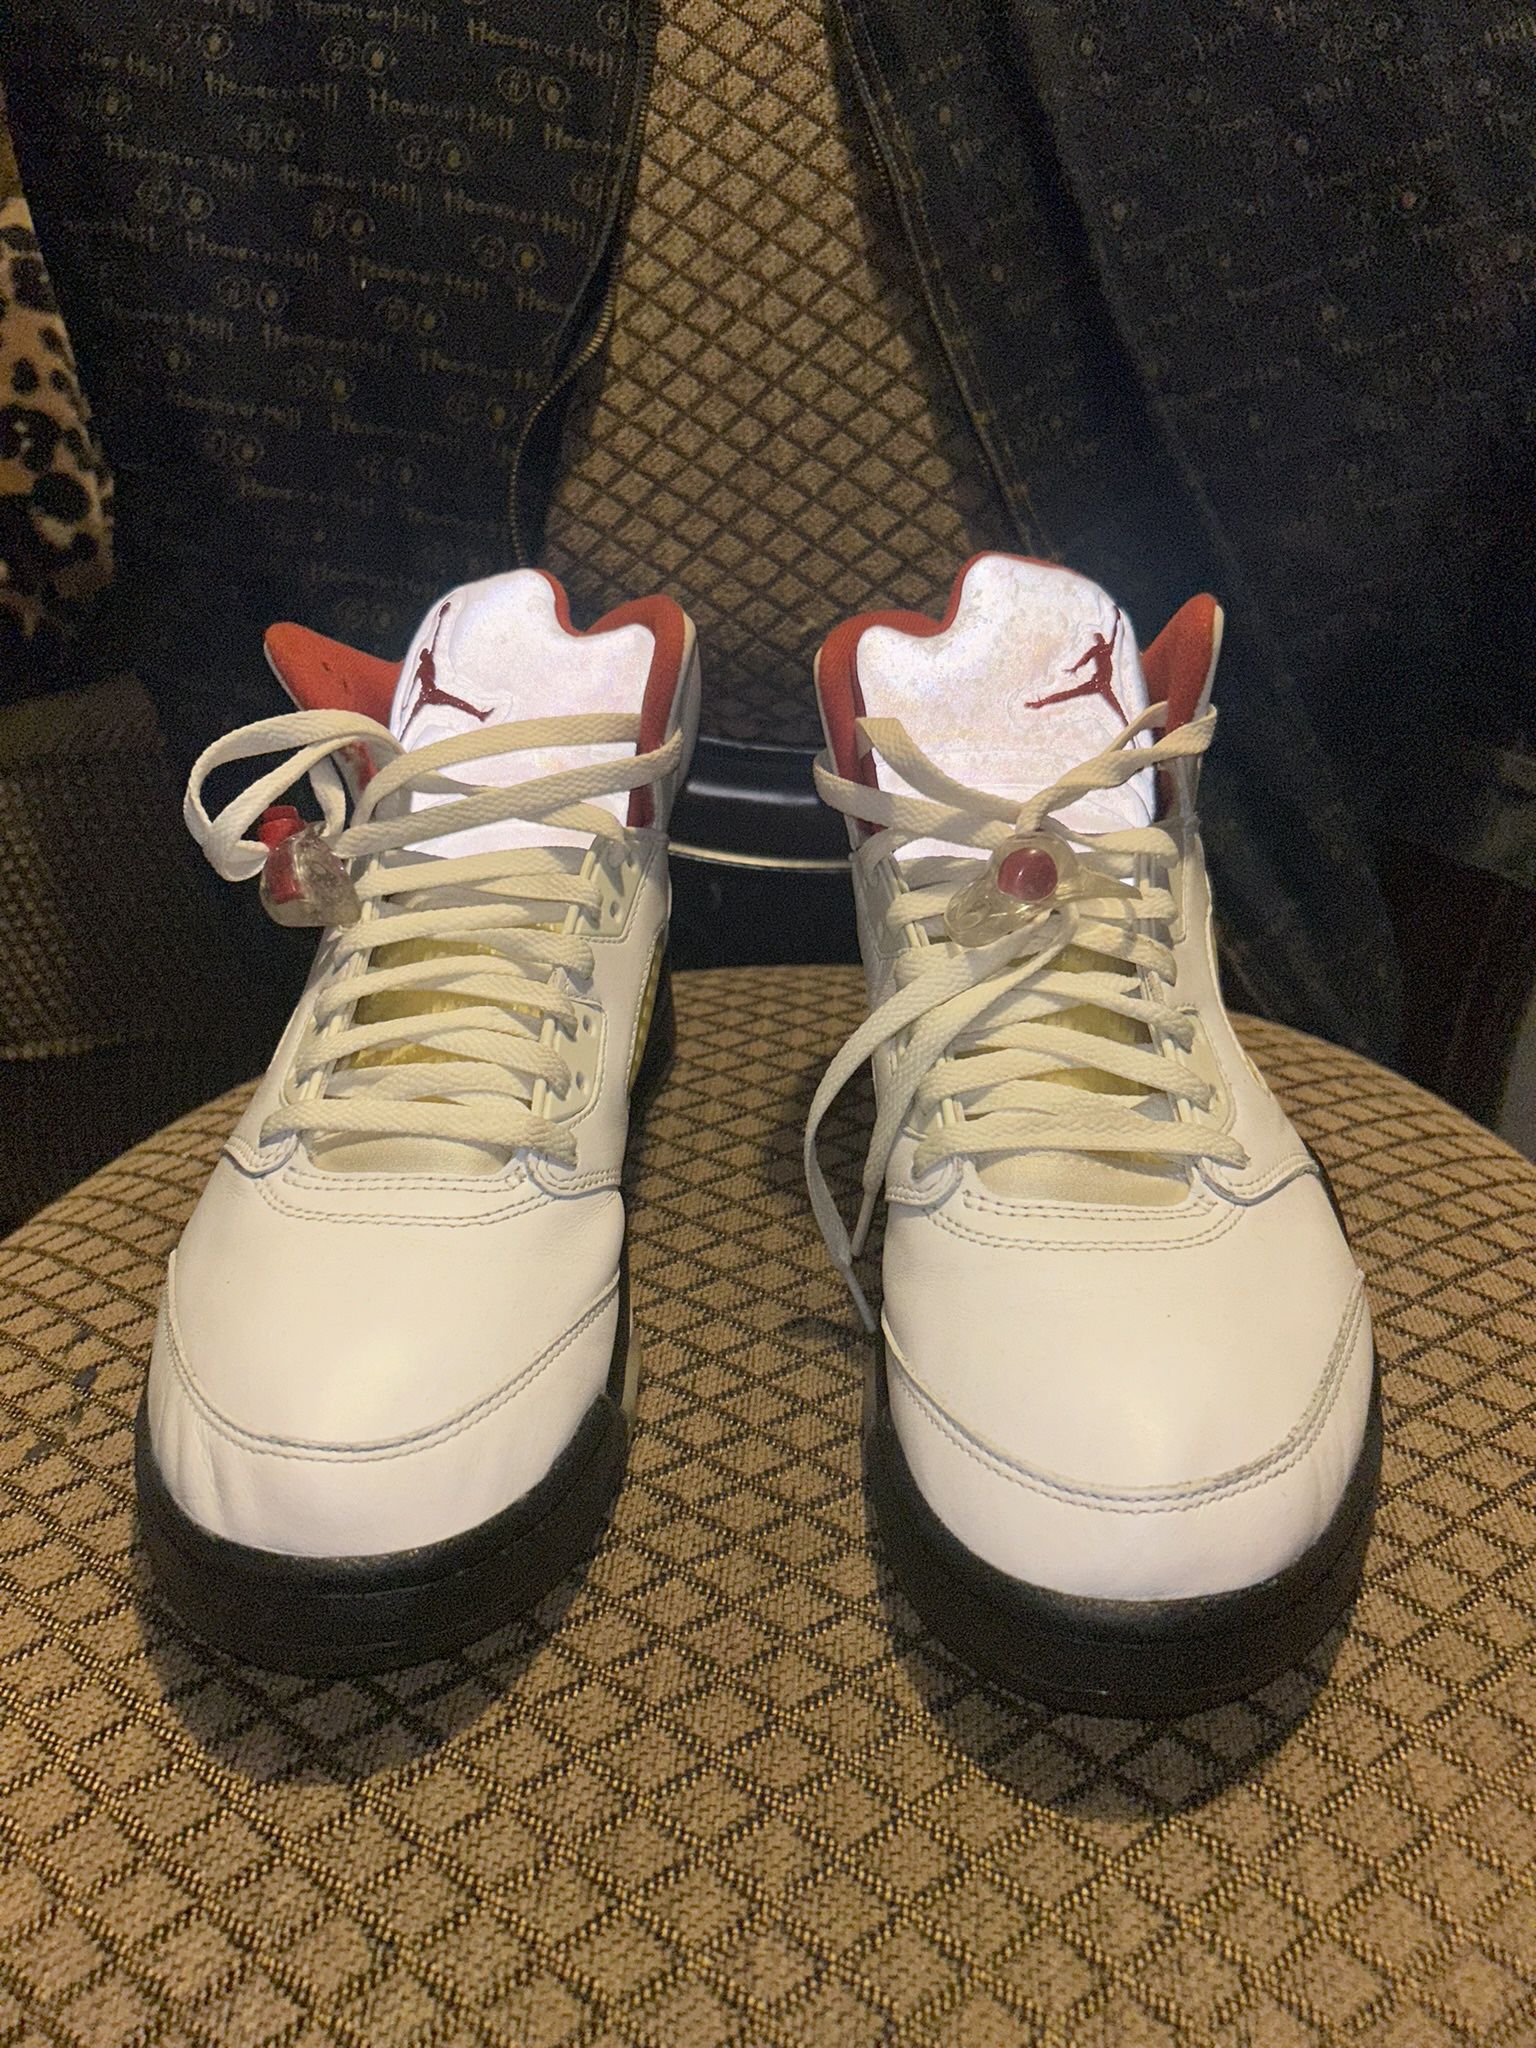 Fire Red 5’s Size 11